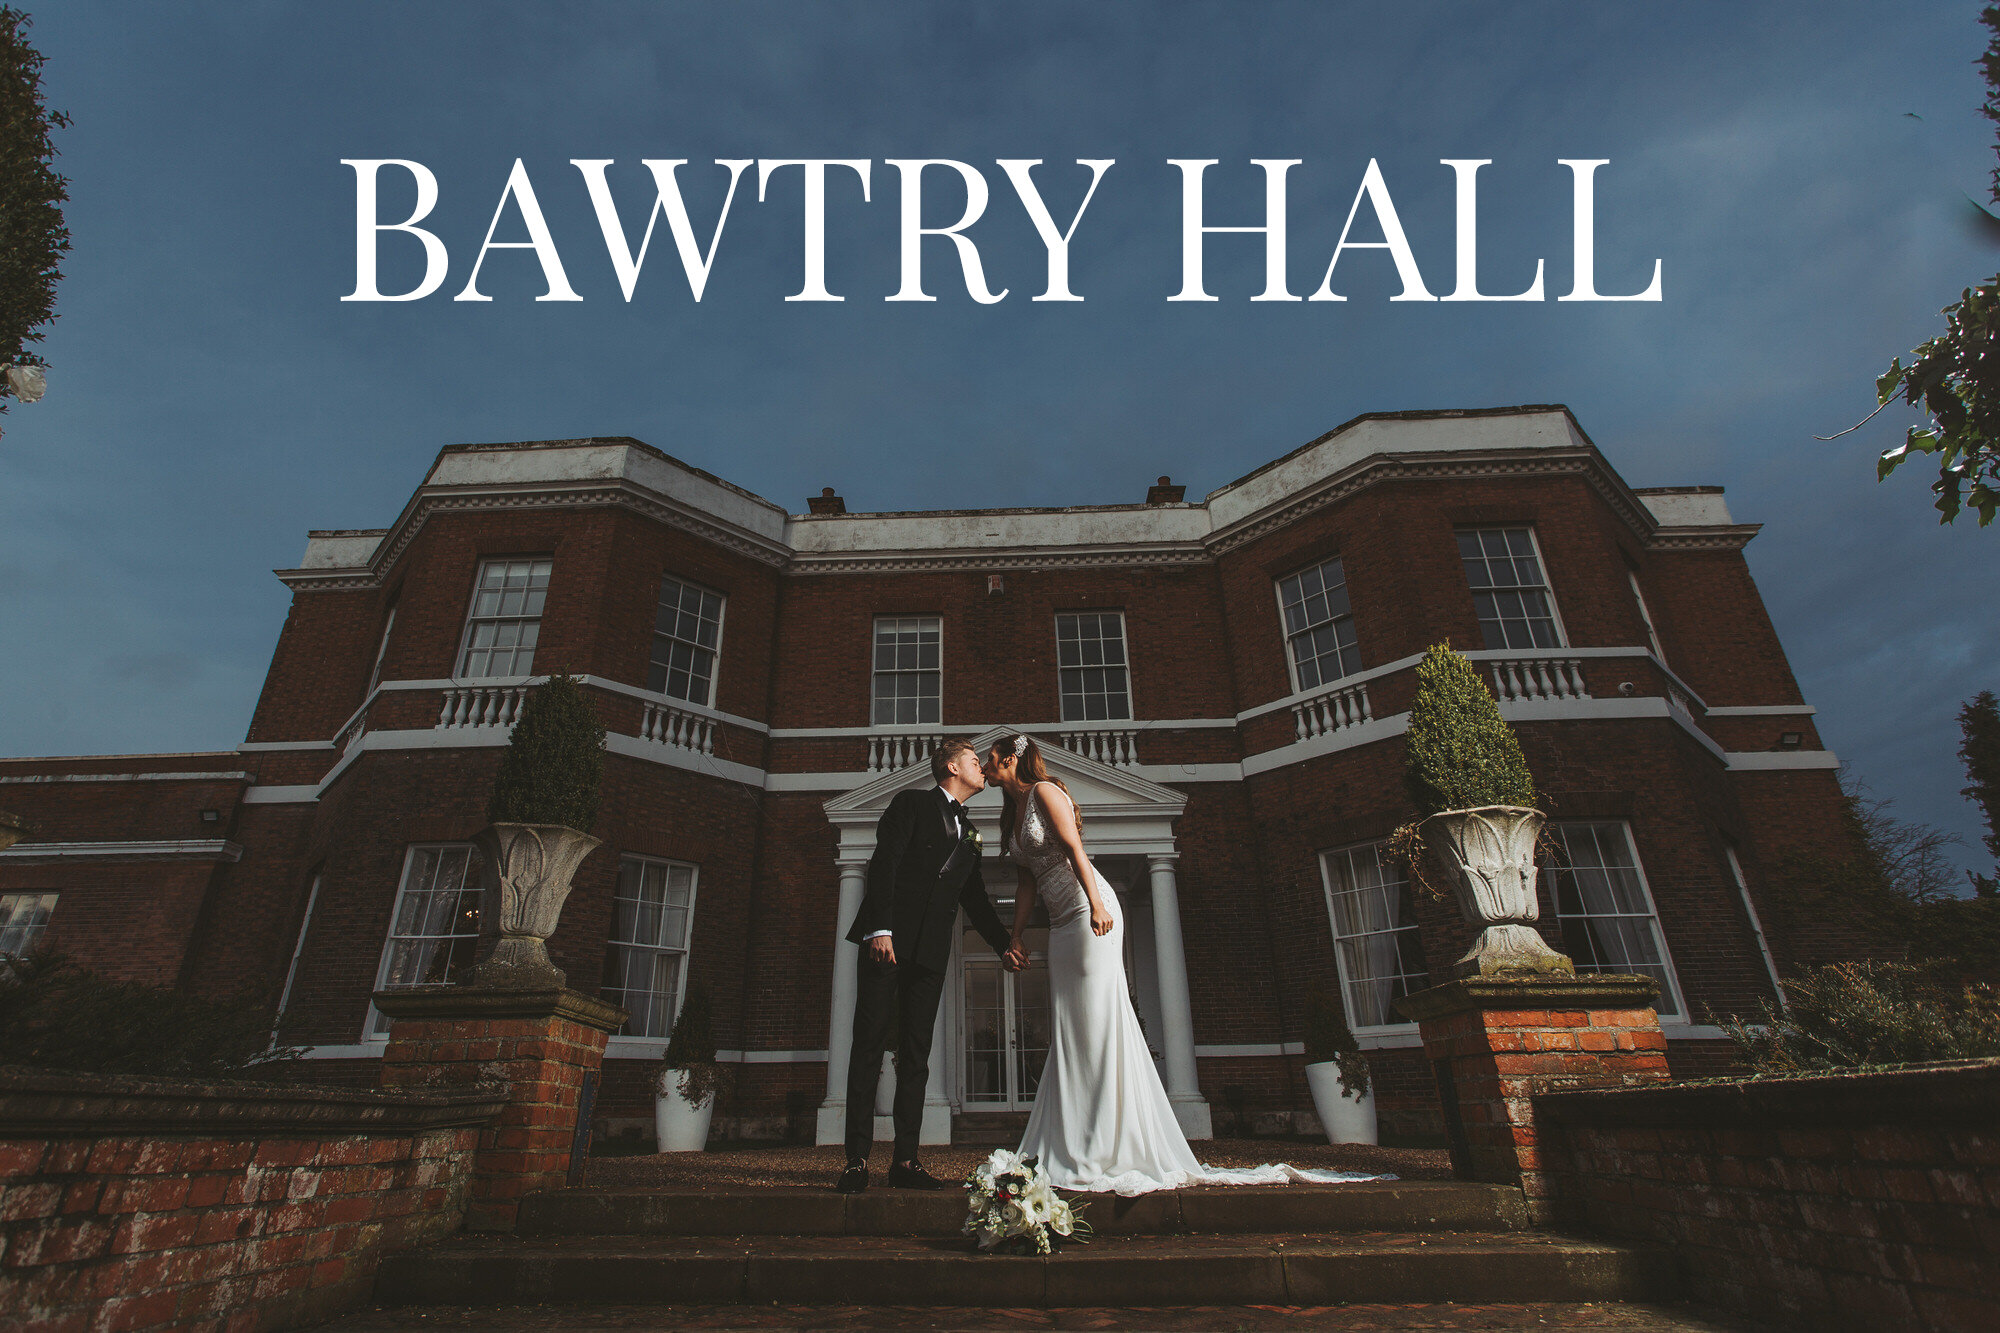 bawtry hall wedding photographer in doncaster1.jpg